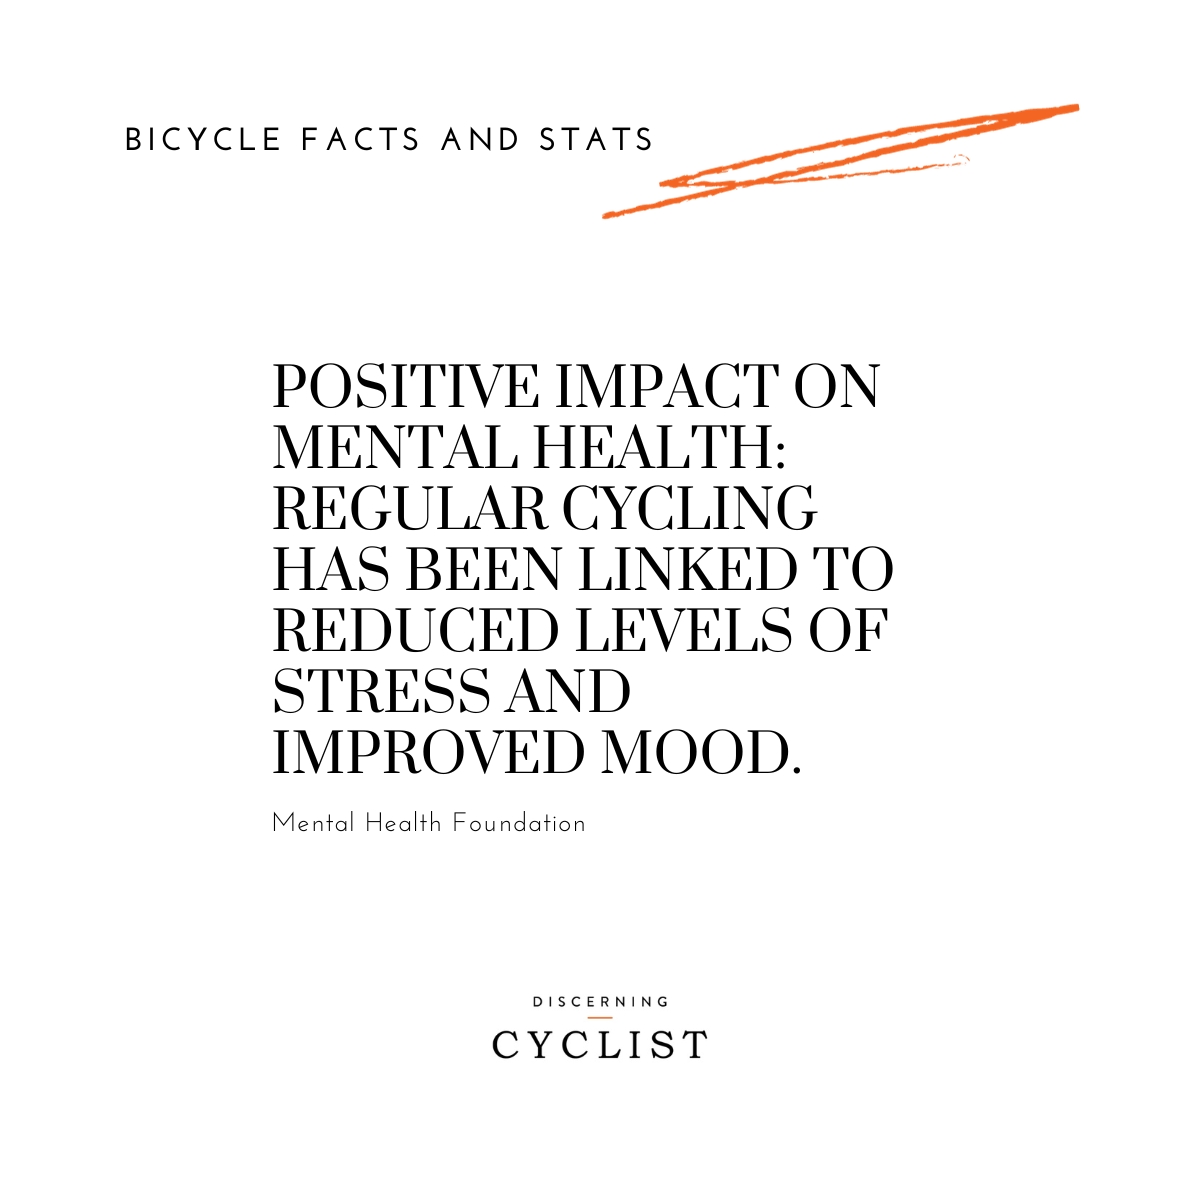 Positive Impact on Mental Health: Regular cycling has been linked to reduced levels of stress and improved mood.